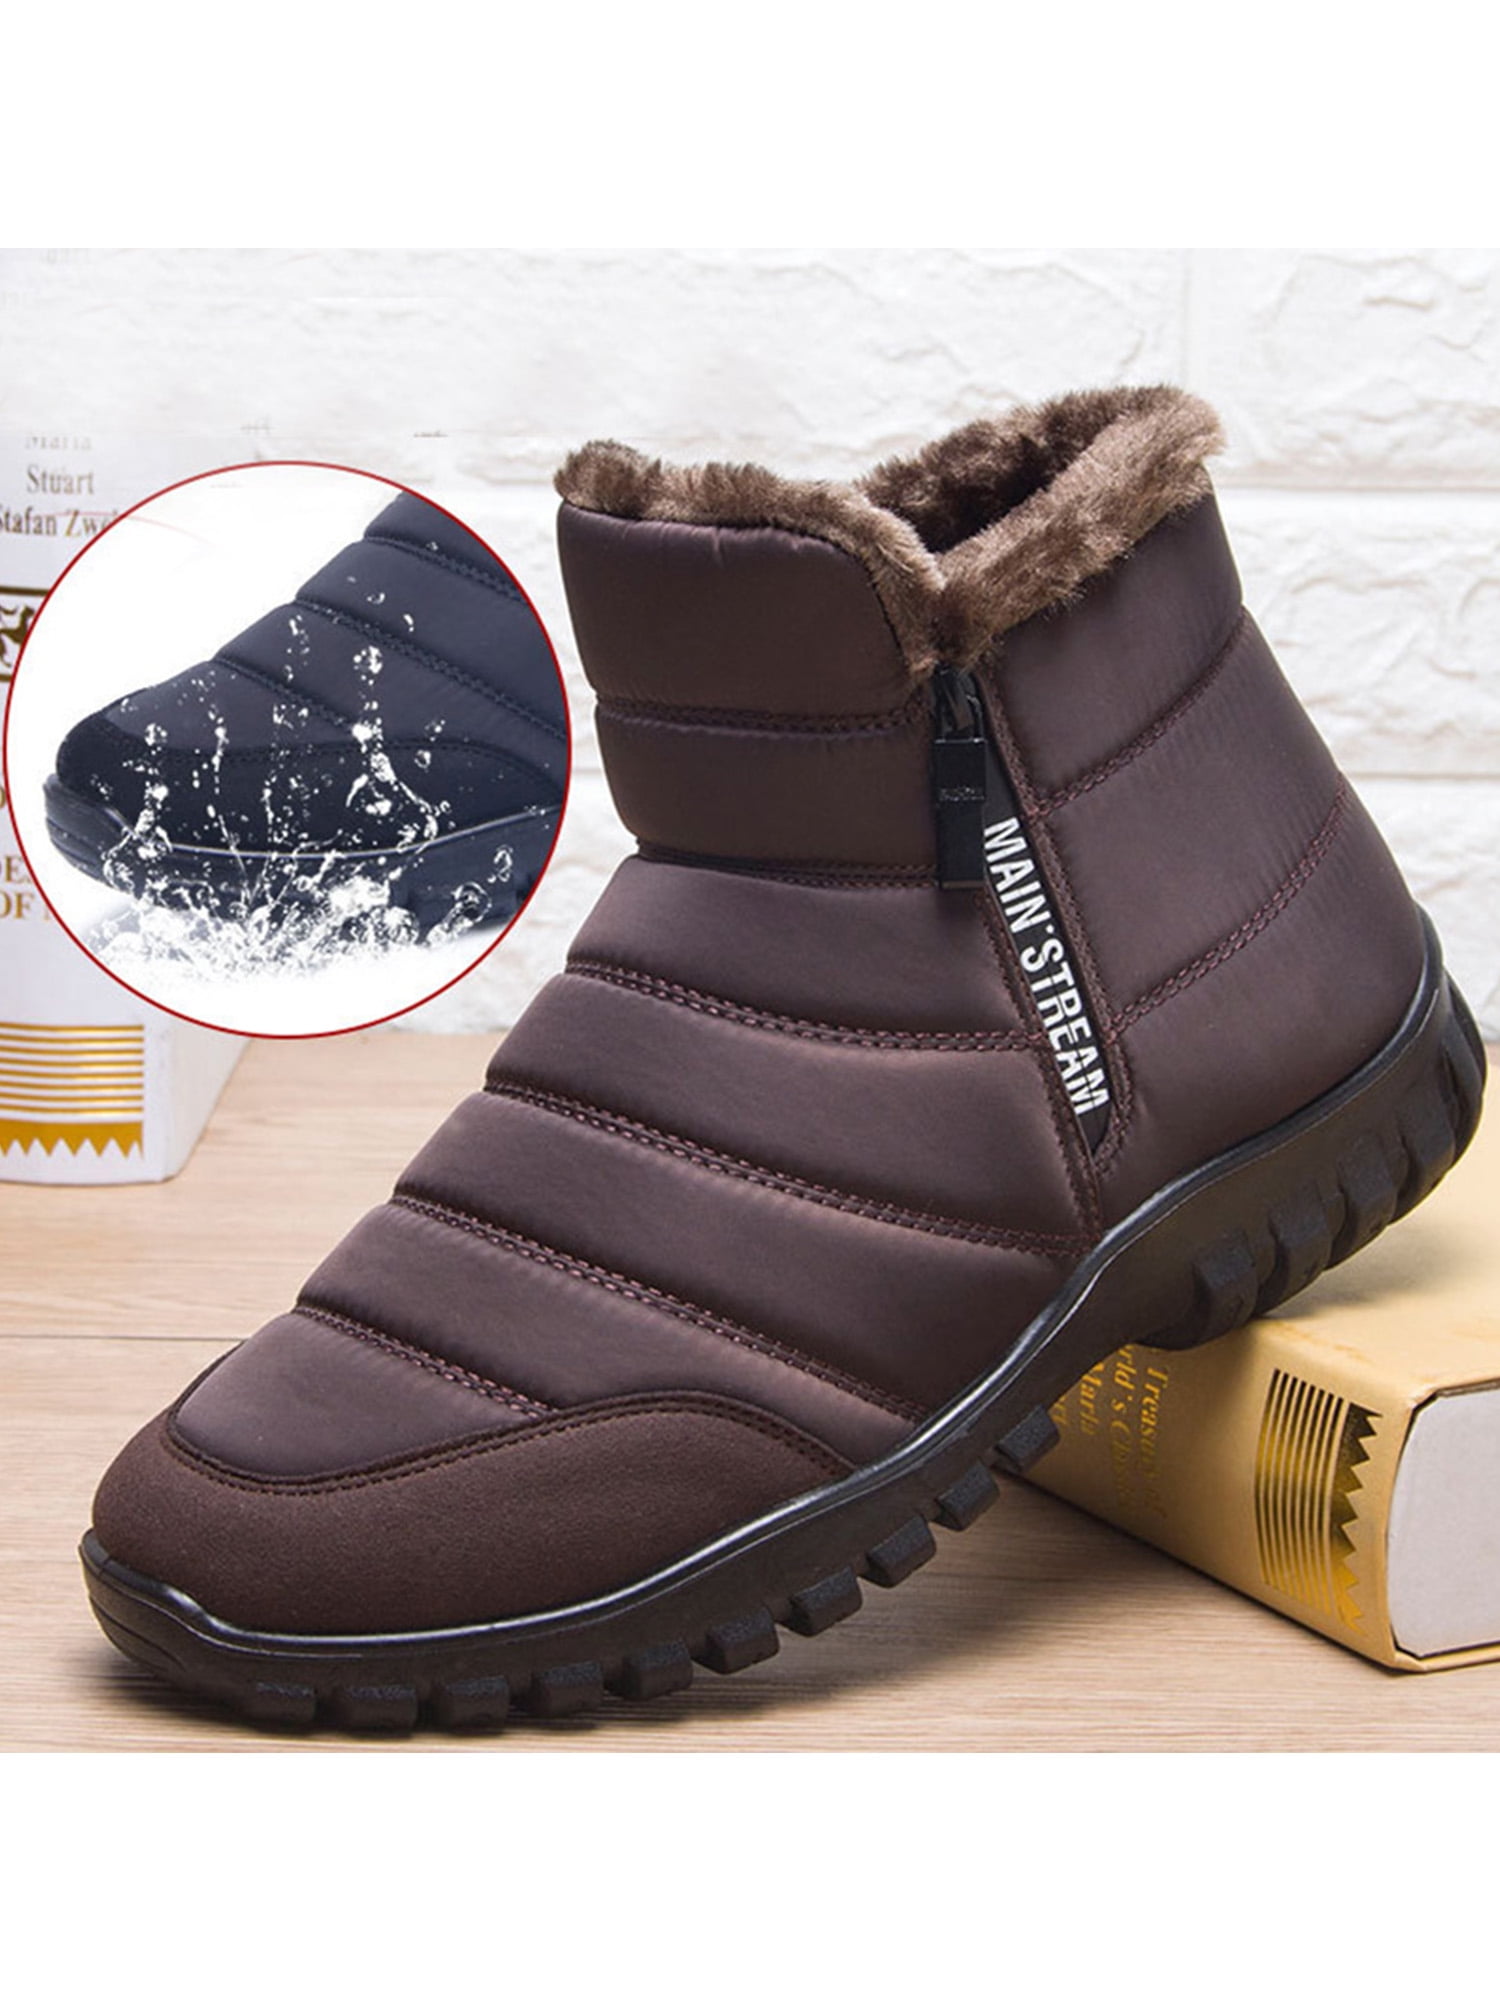 Men Winter Warm Ankle Boots Outdoor Walking Hiking High Top Shoes Fur Sneakers